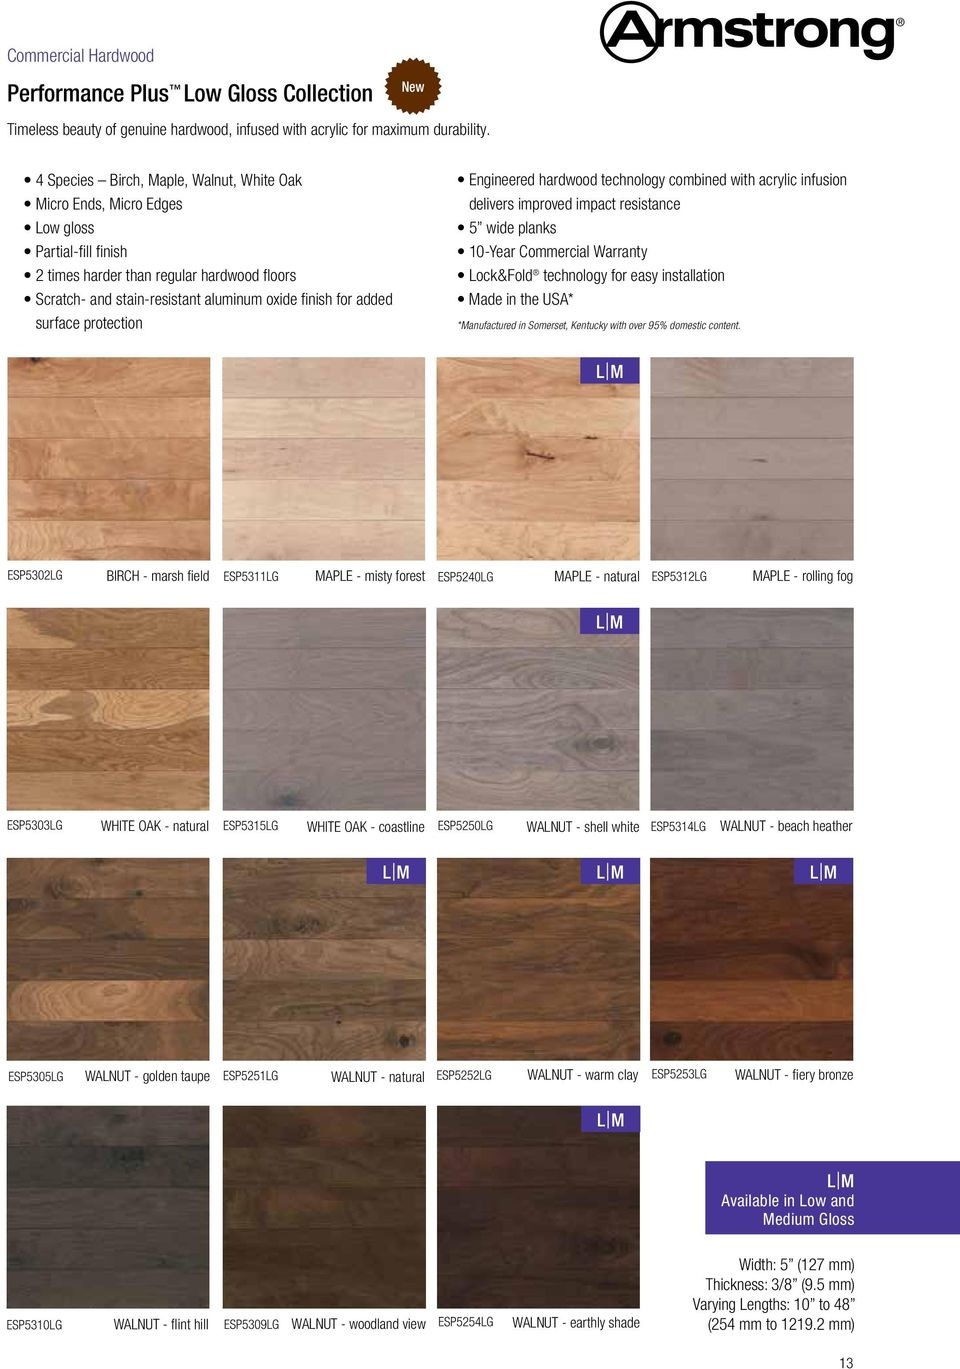 17 Fashionable Recommended Humidity Level for Hardwood Floors 2024 free download recommended humidity level for hardwood floors of performance plus midtown pdf inside added surface protection engineered hardwood technology combined with acrylic infusion delivers improved